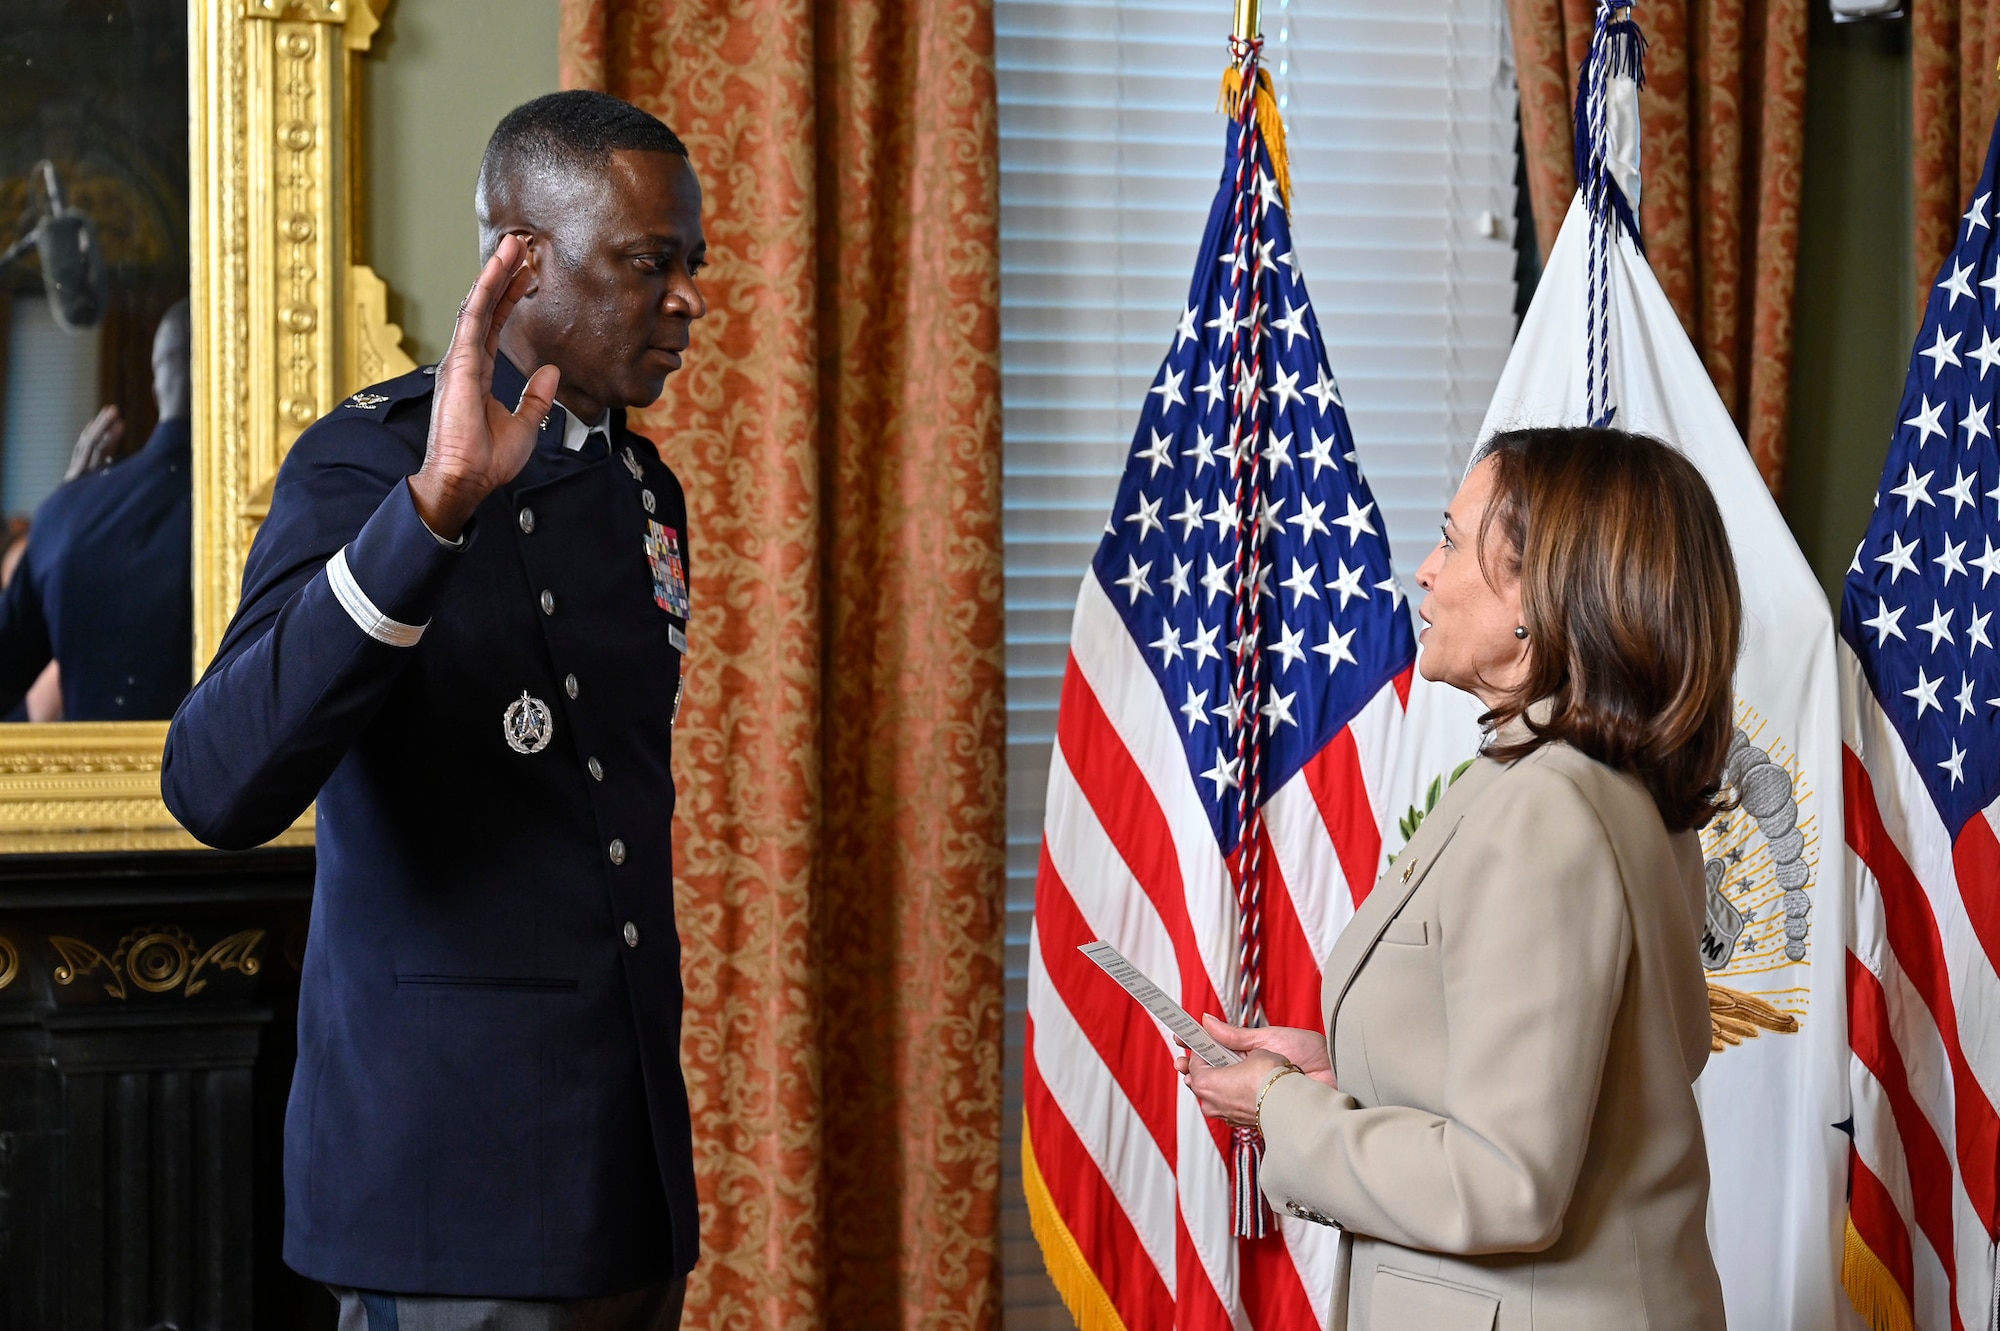 Space Force Col. Jacob Middleton recites his oath of office to Vice President Kamala Harris during his promotion to brigadier general at the Eisenhower Executive Office Building, Washington, D.C., April 4, 2023. Middleton is the director of national security space policy for the National Space Council. (U.S. Air Force photo by Eric Dietrich)